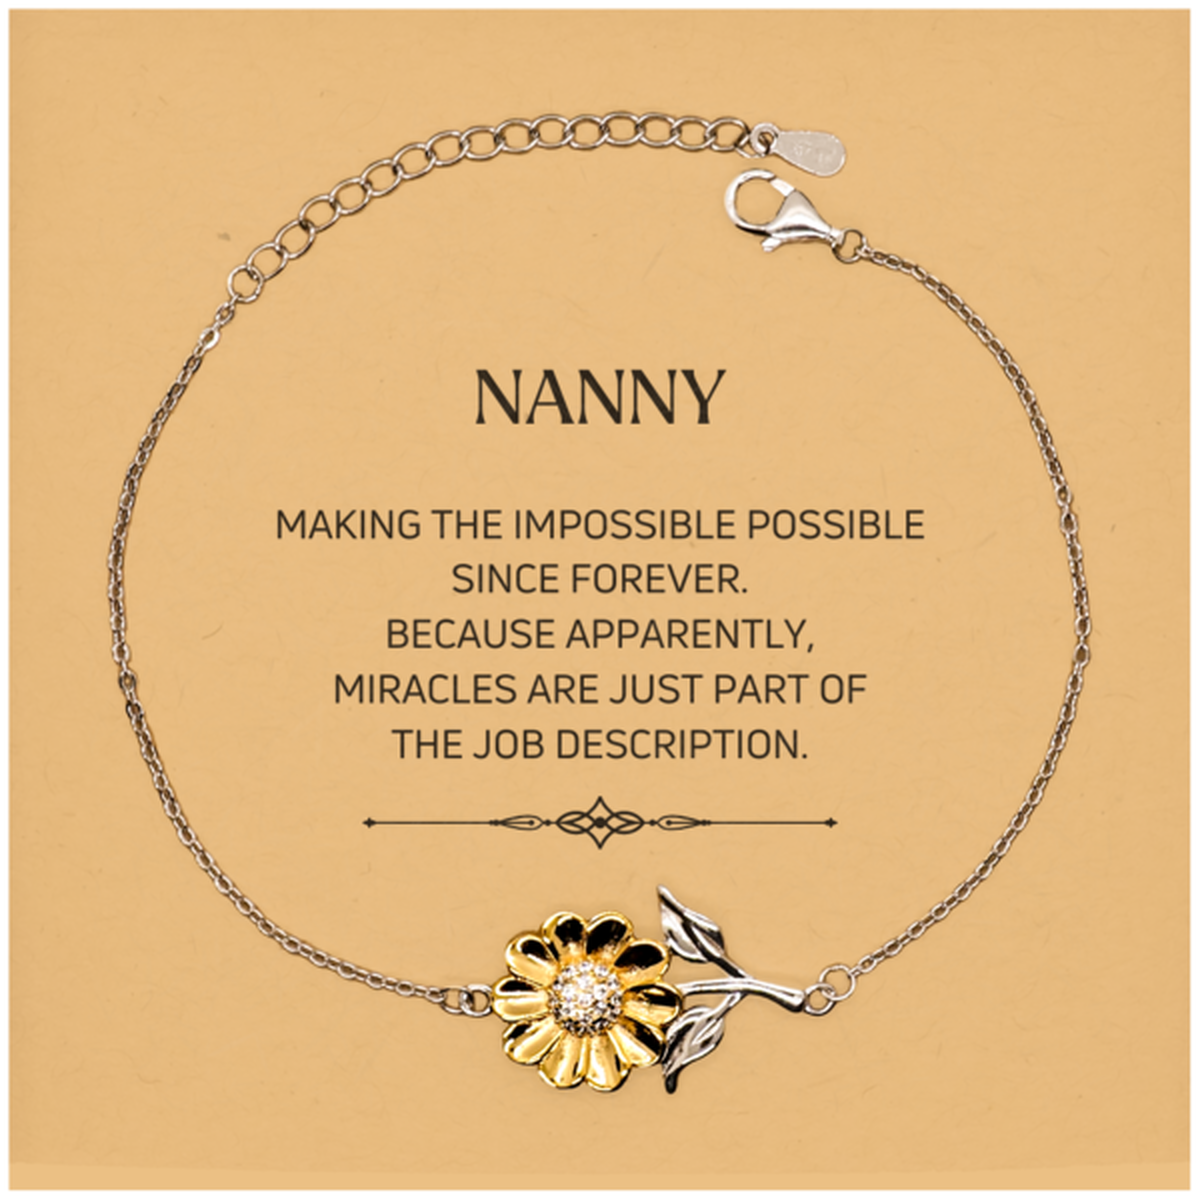 Funny Nanny Gifts, Miracles are just part of the job description, Inspirational Birthday Christmas Sunflower Bracelet For Nanny, Men, Women, Coworkers, Friends, Boss